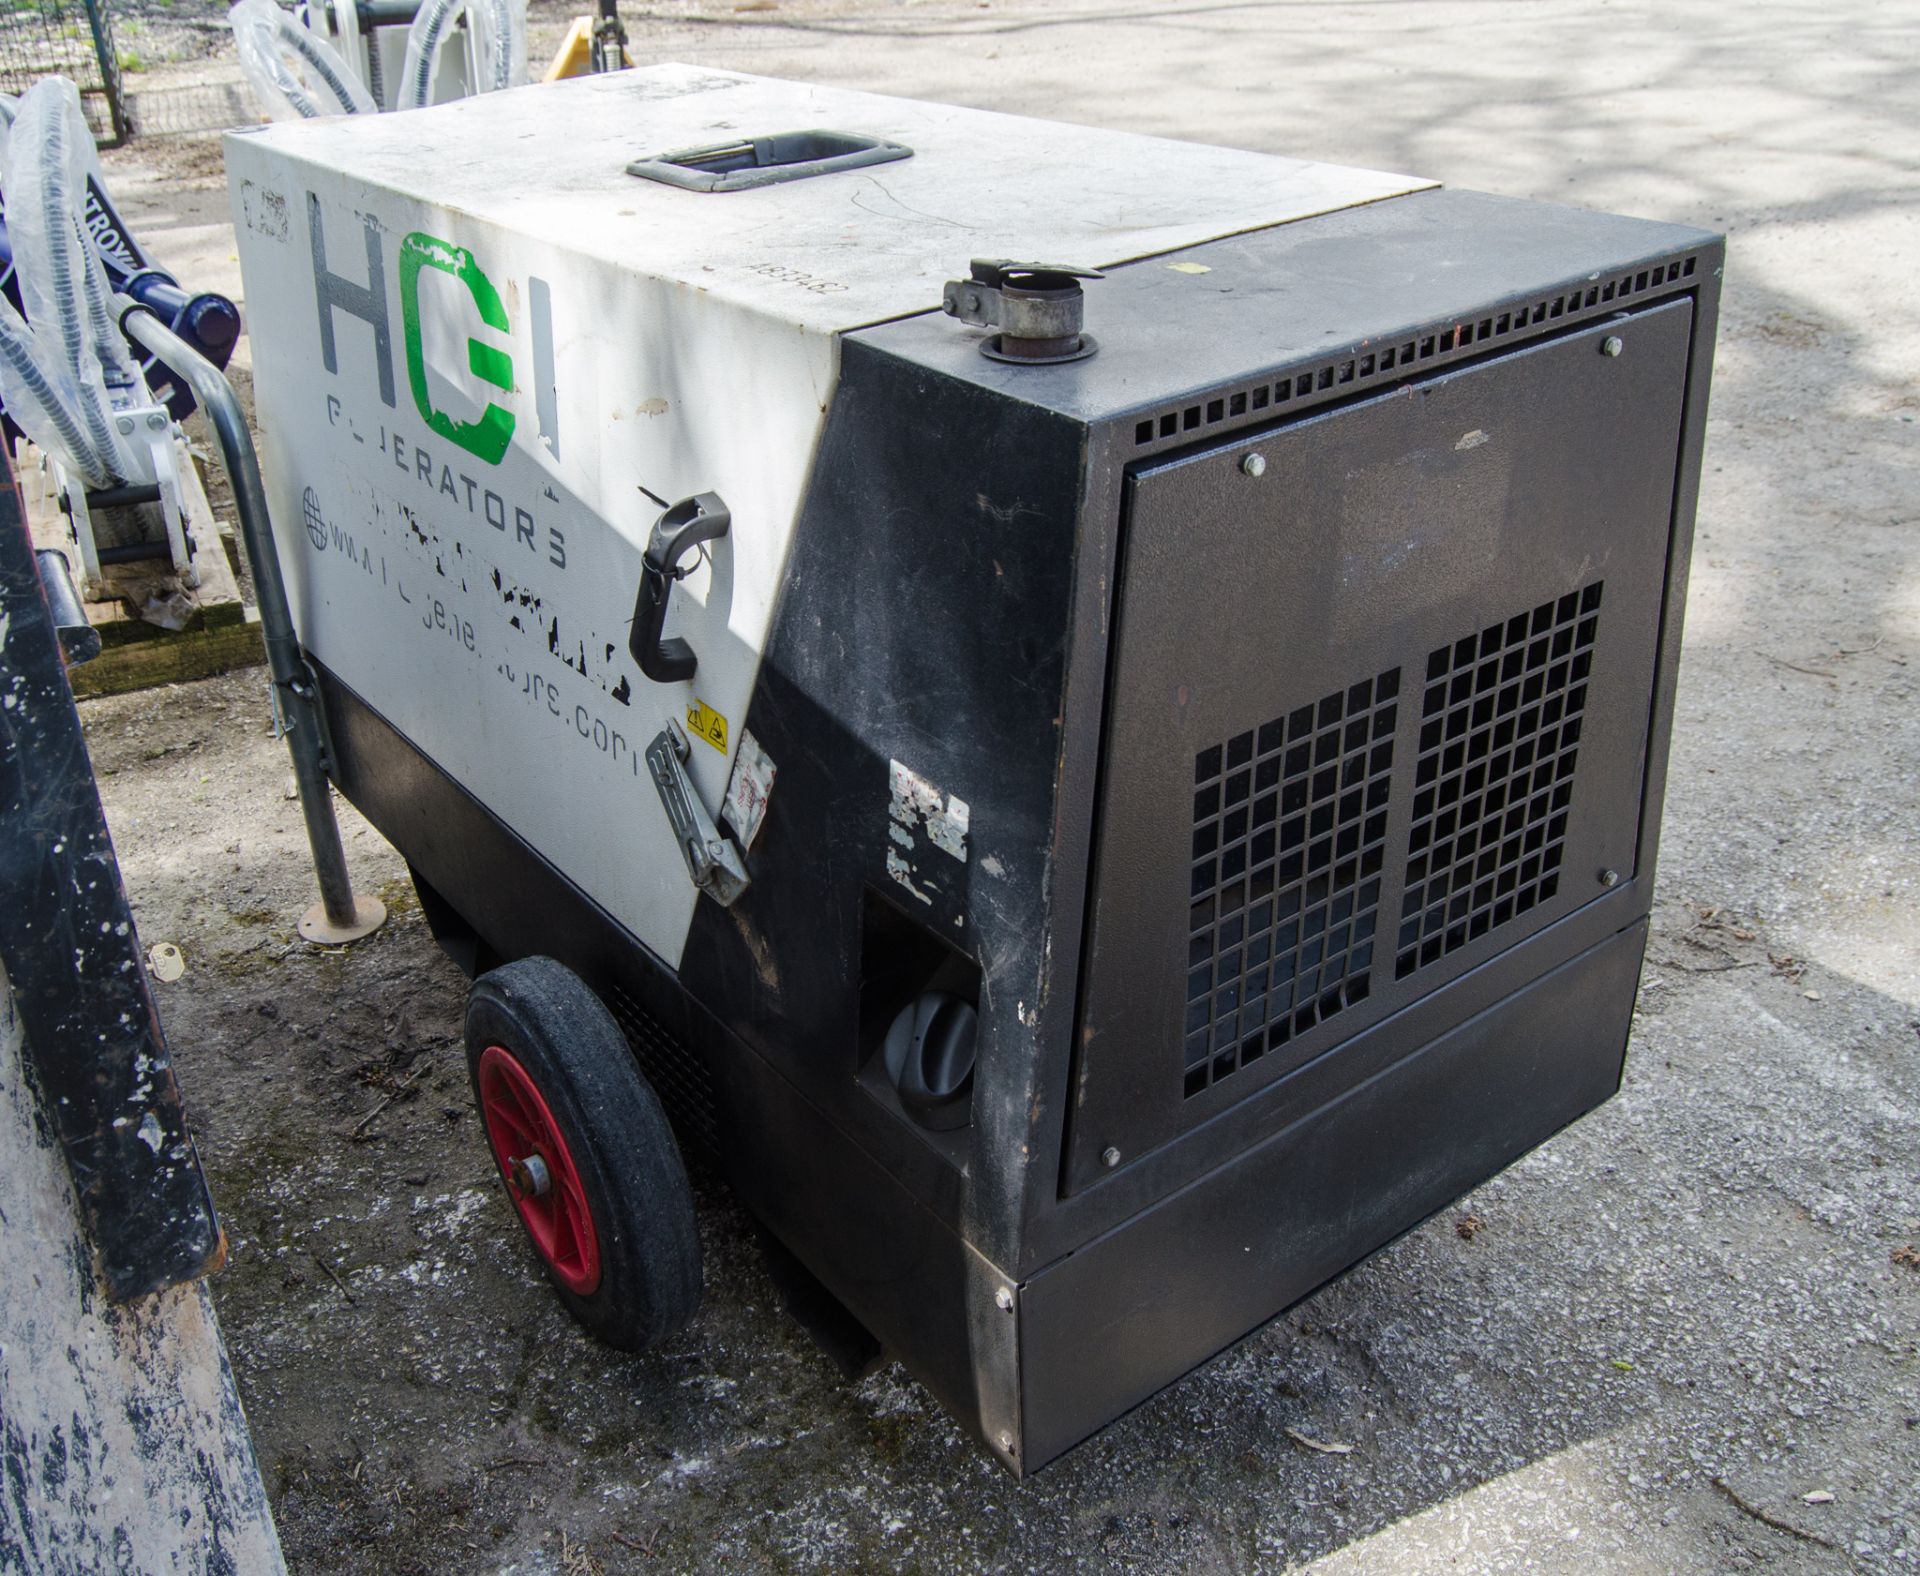 HGI SKD100-110 kva diesel driven generator S/N: 2922510 Recorded Hours: 8179 A833462 - Image 2 of 5